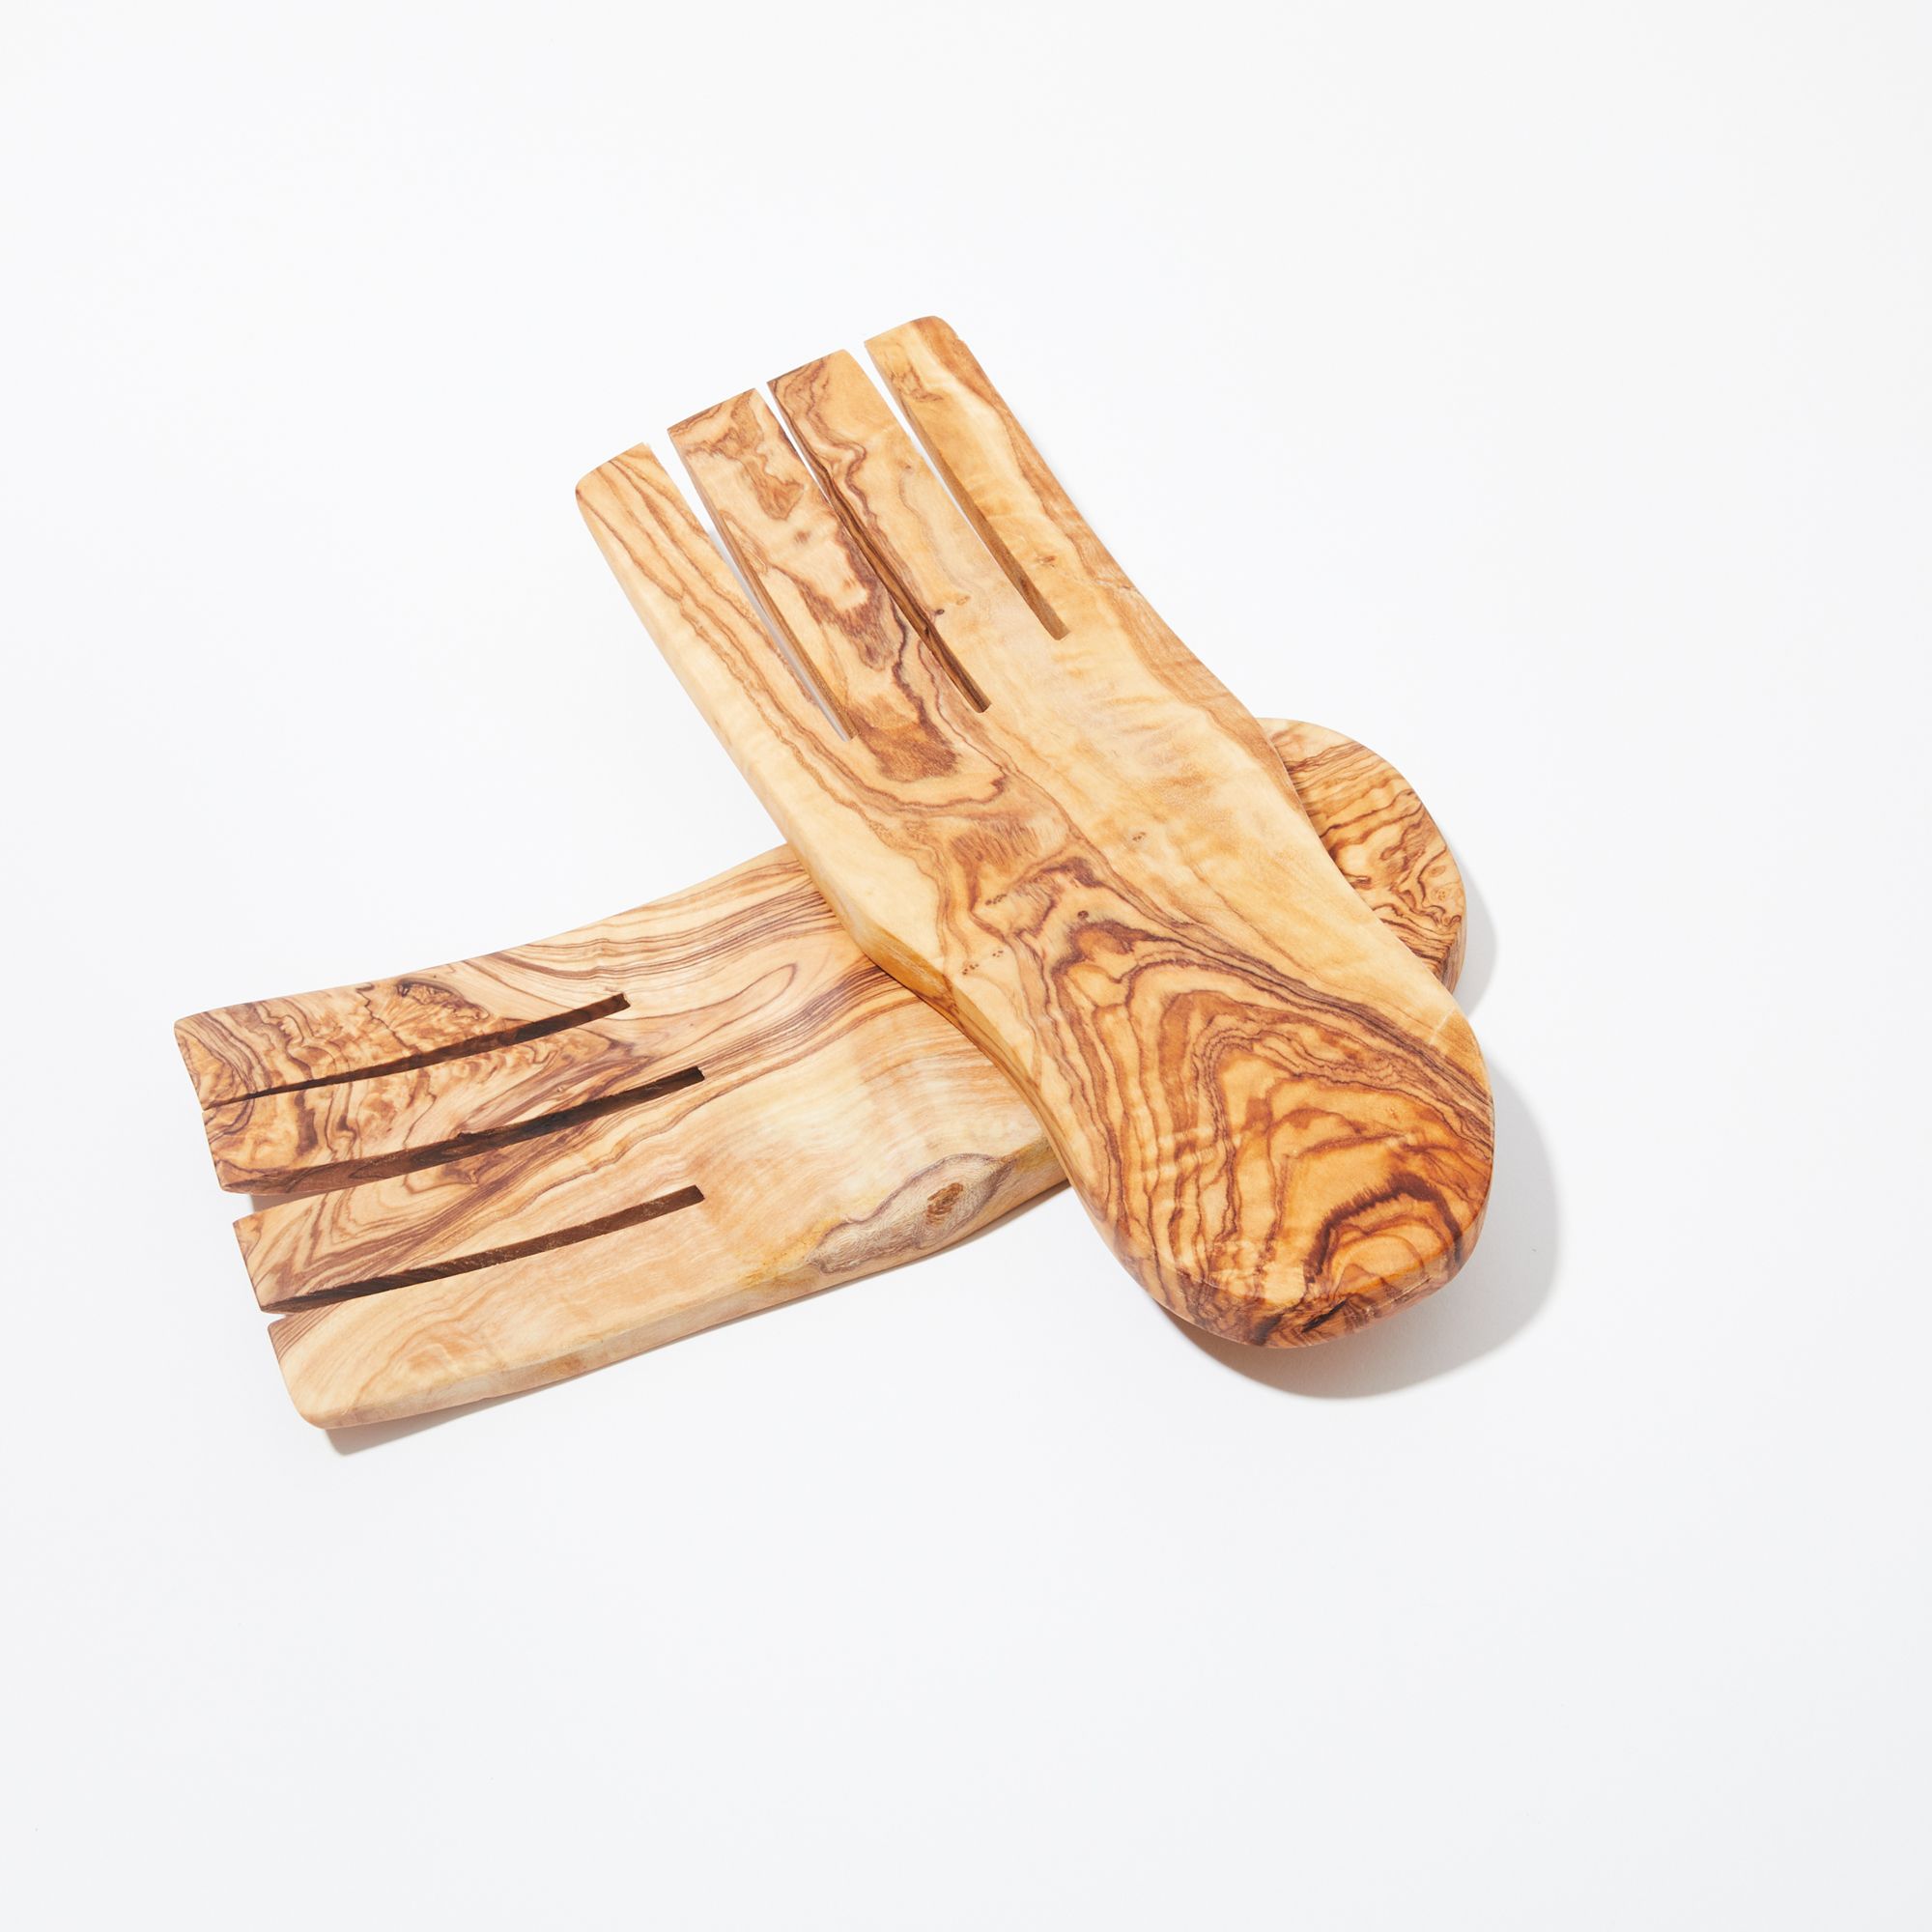 A pair of olivewood serving utensils overlapping